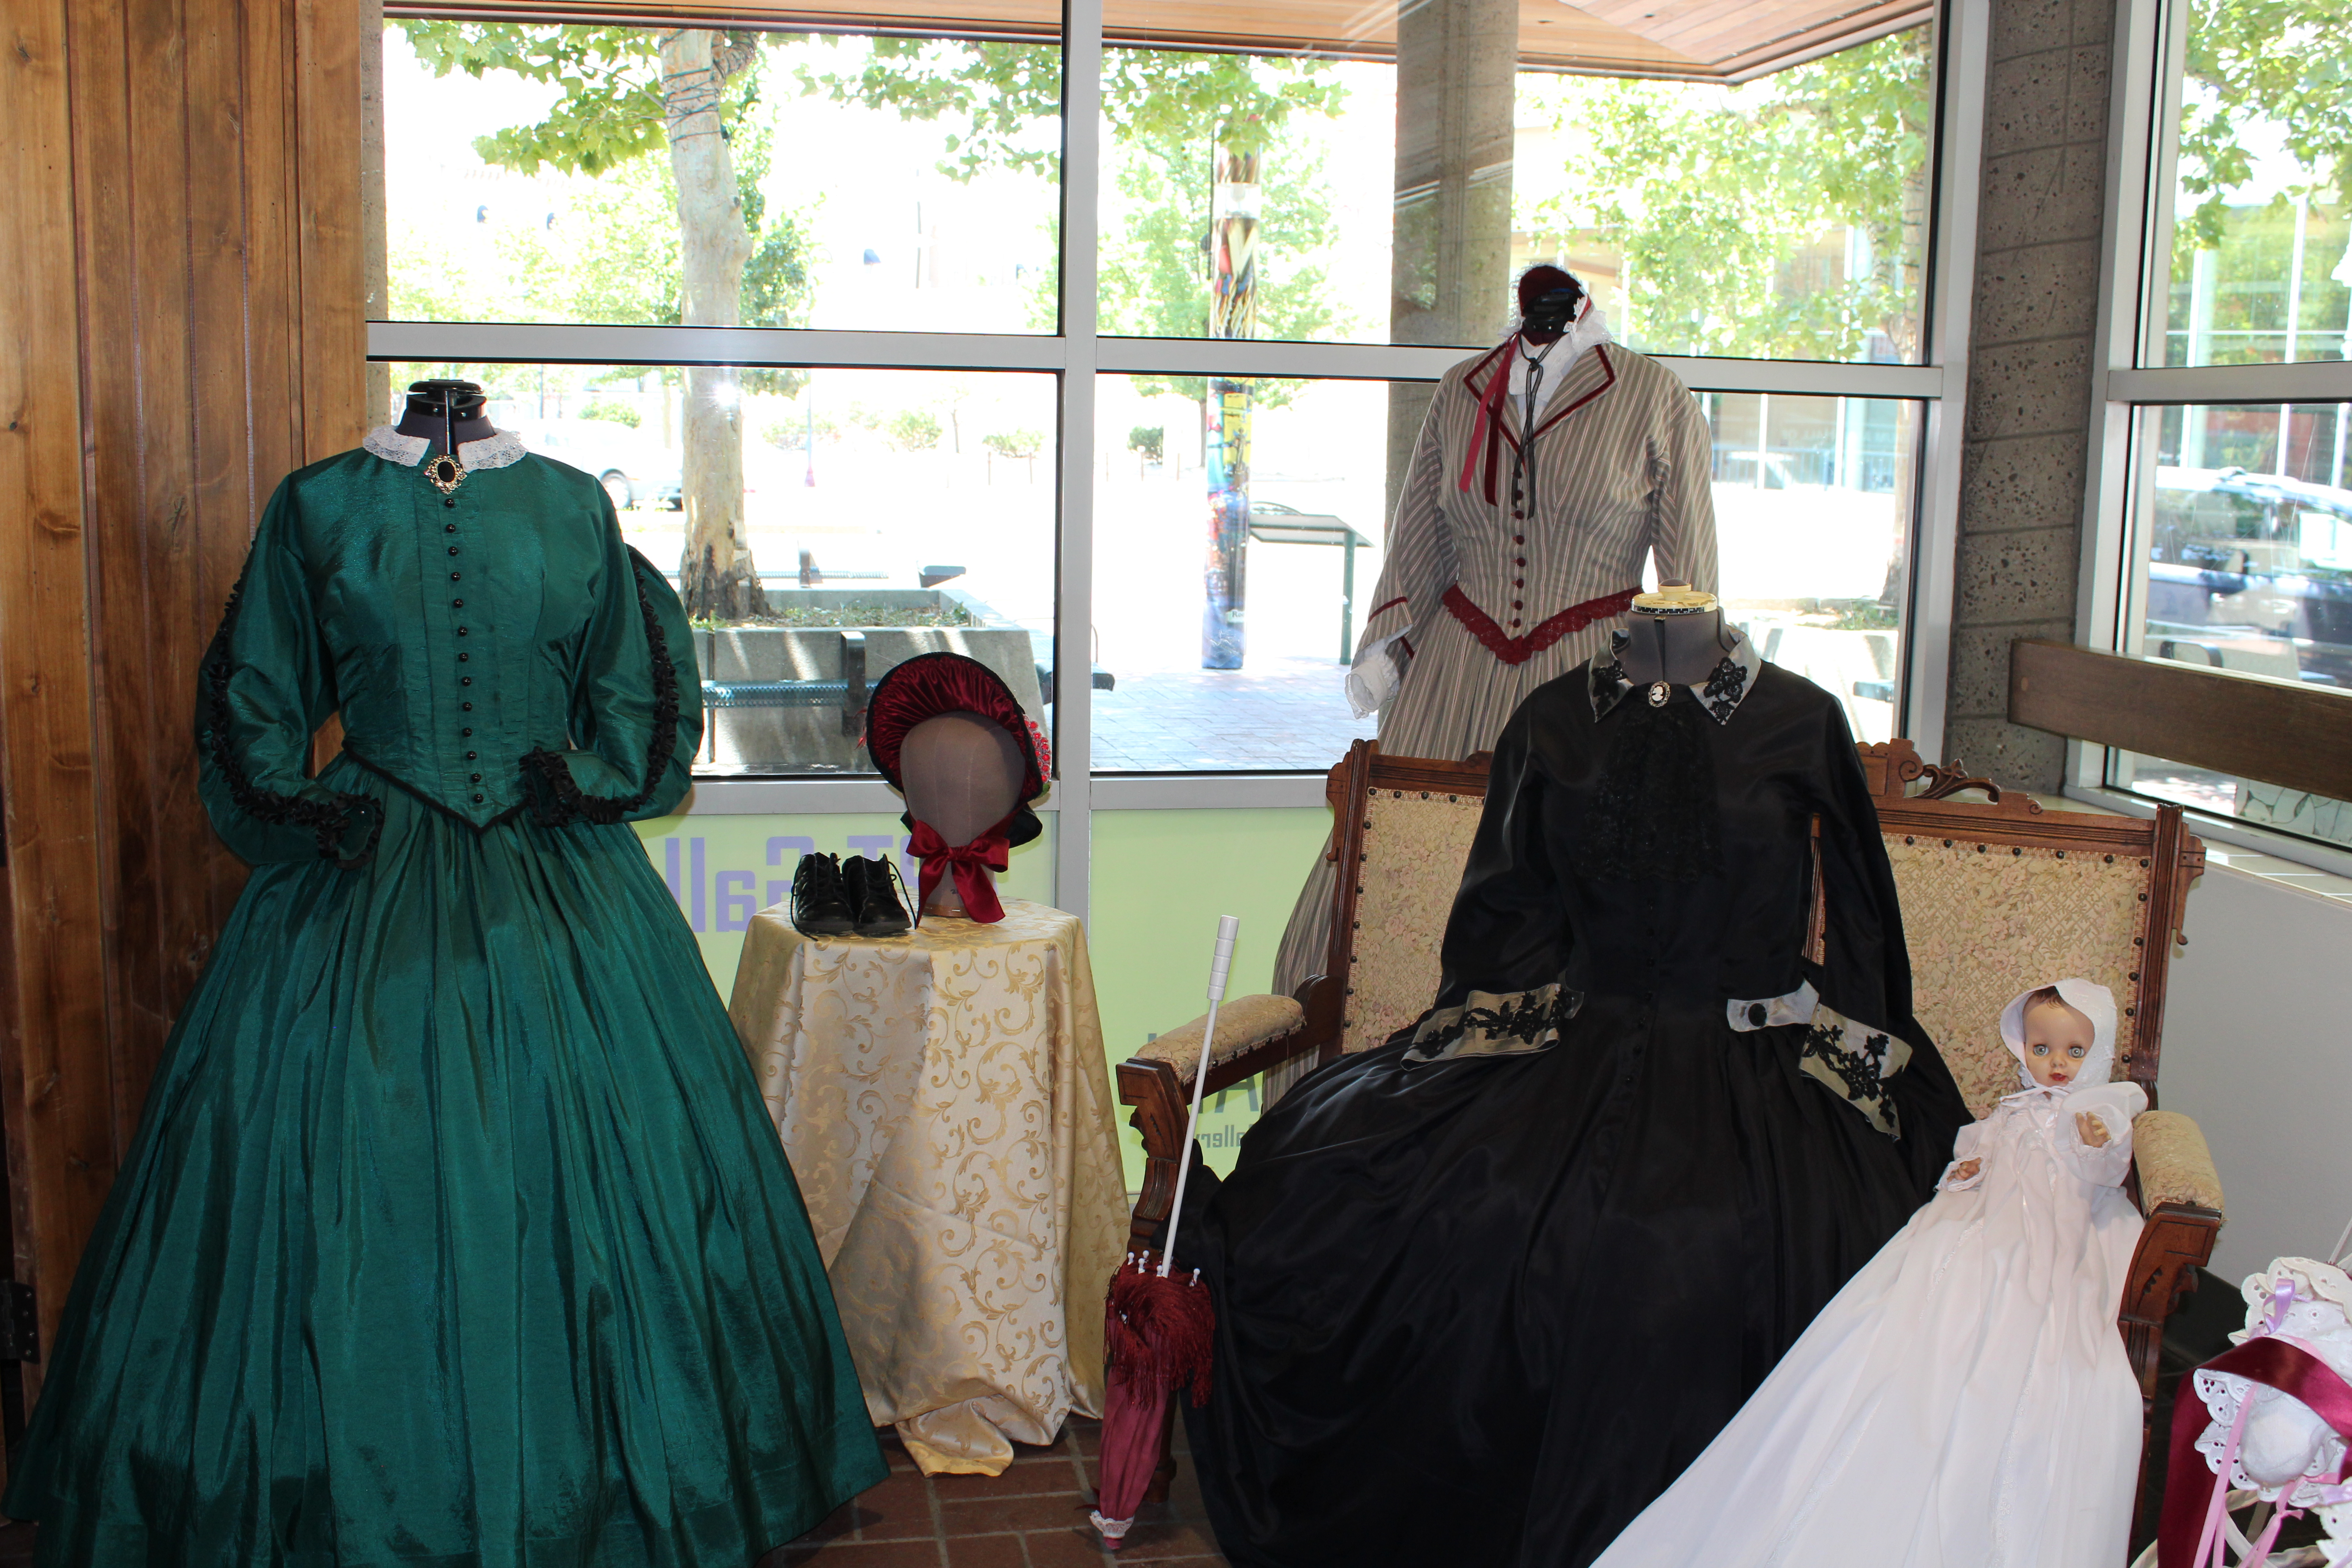 Costumes from 1864 to 1964 in Nevada